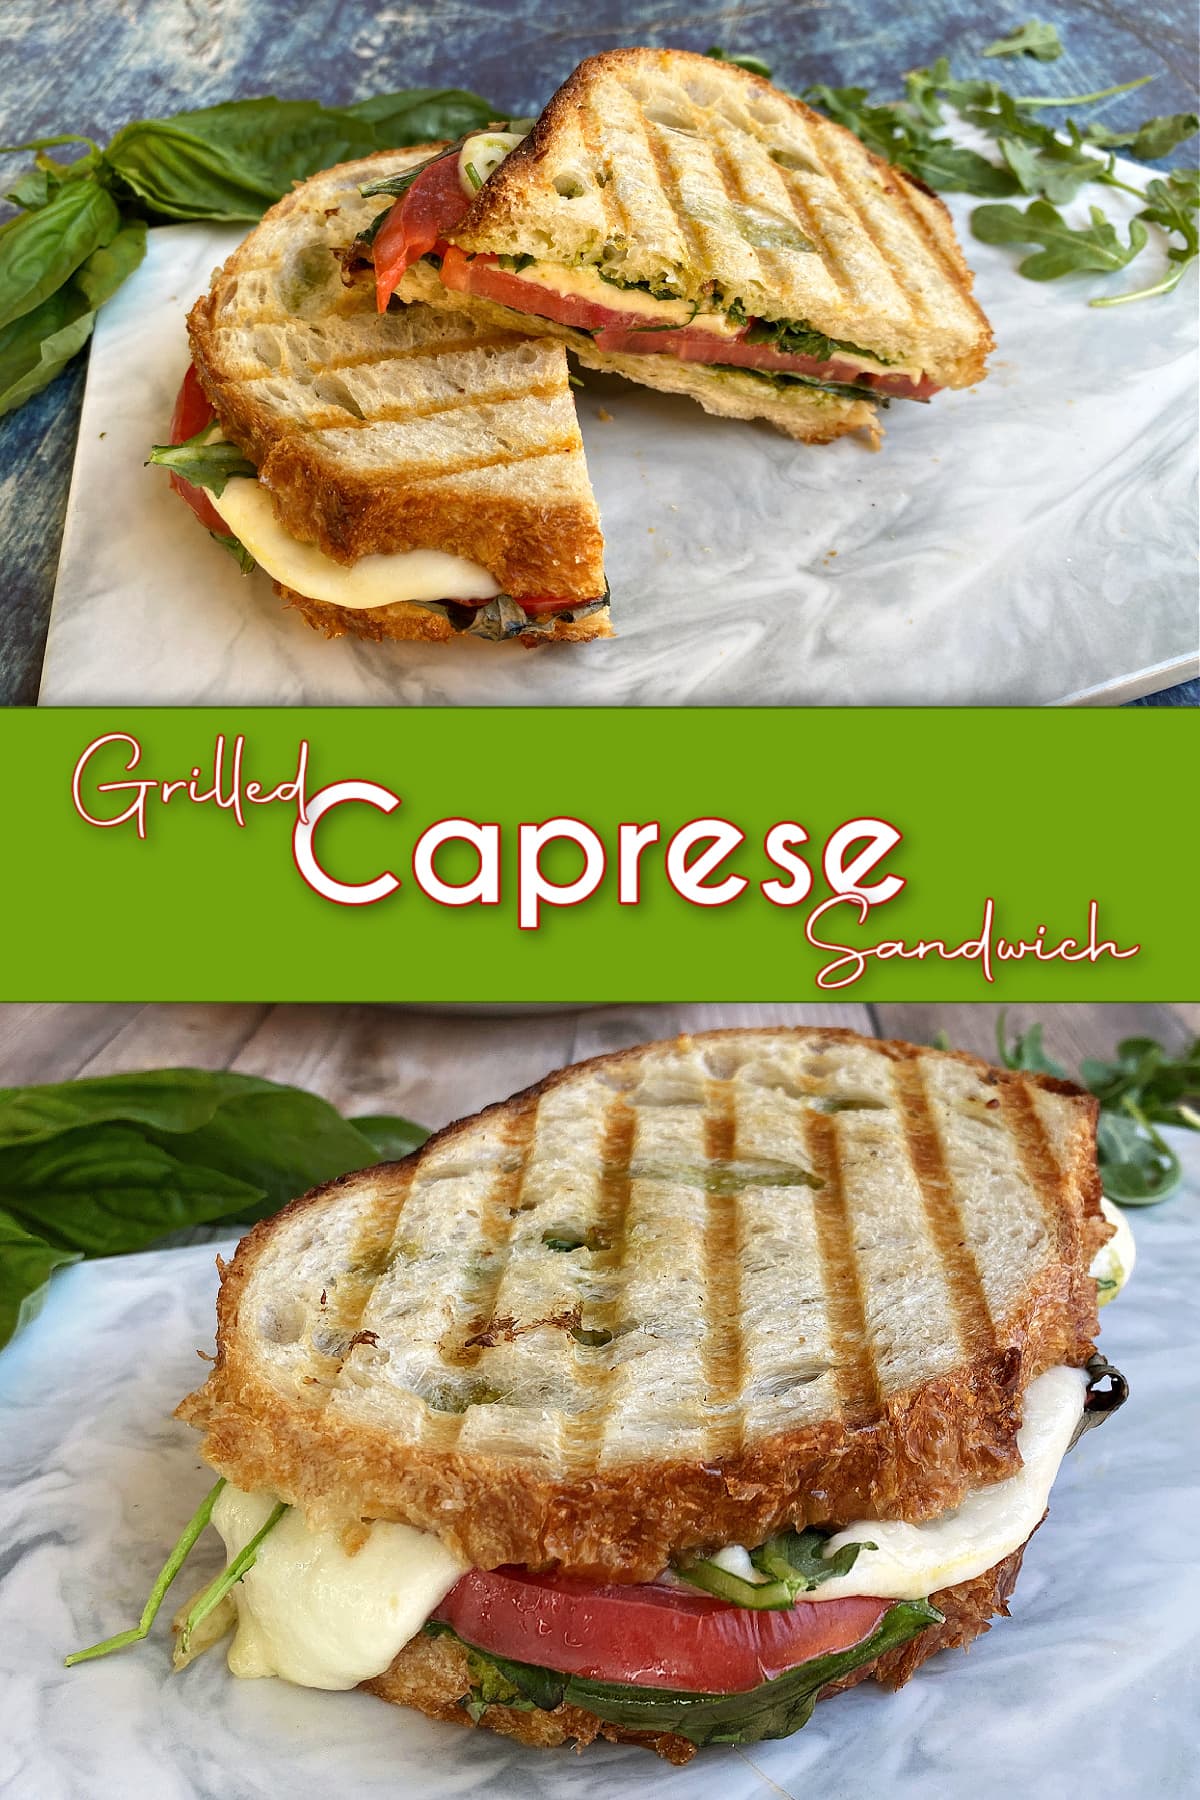 Whole caprese sandwich on a small cutting board. Cut sandwich on a plate in the background. Pin text reads: Grilled Caprese Sandwich